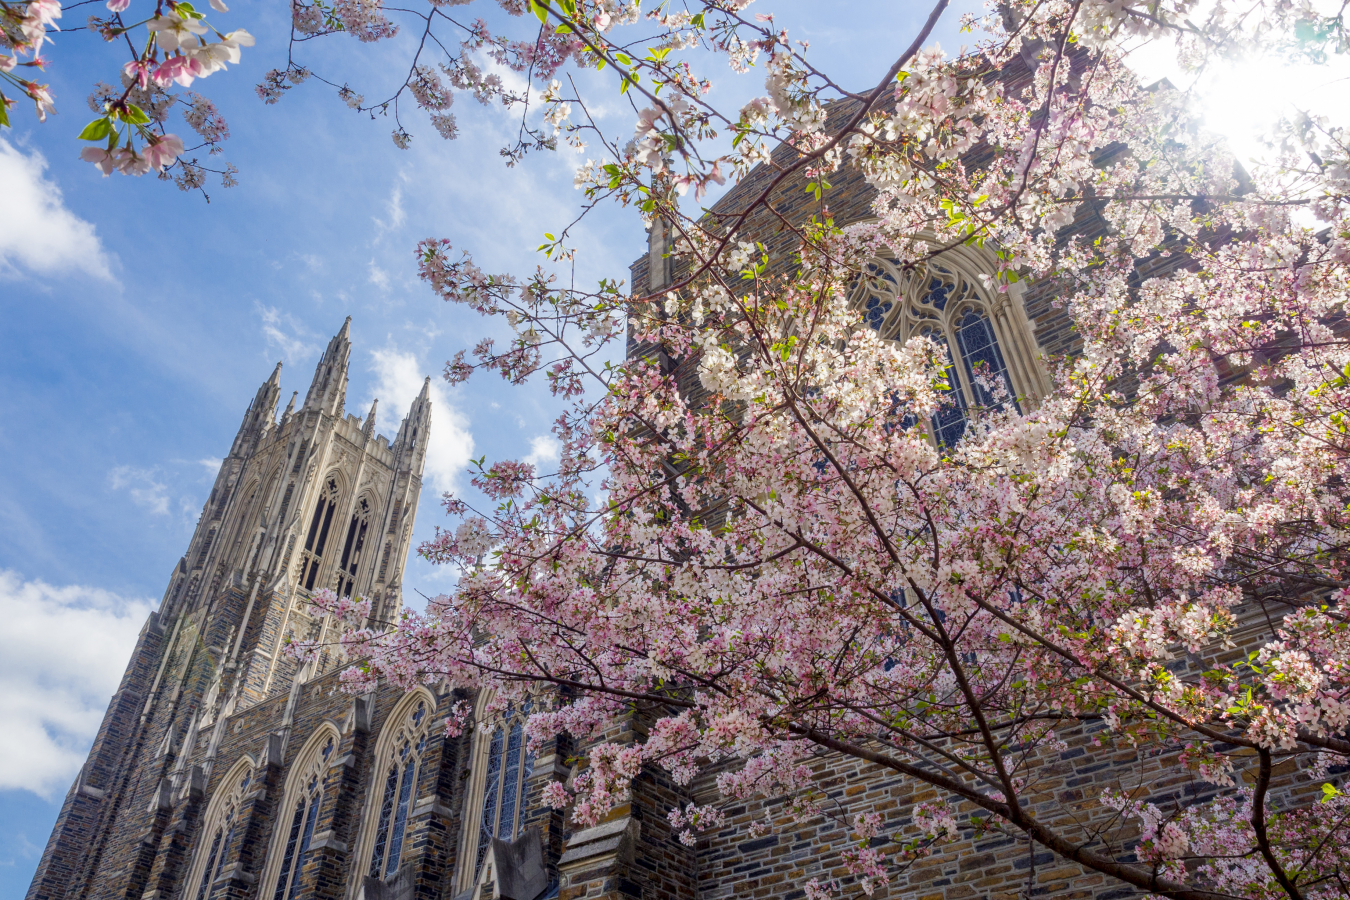 Looking up at Duke Chapel with spring flower blossoms.